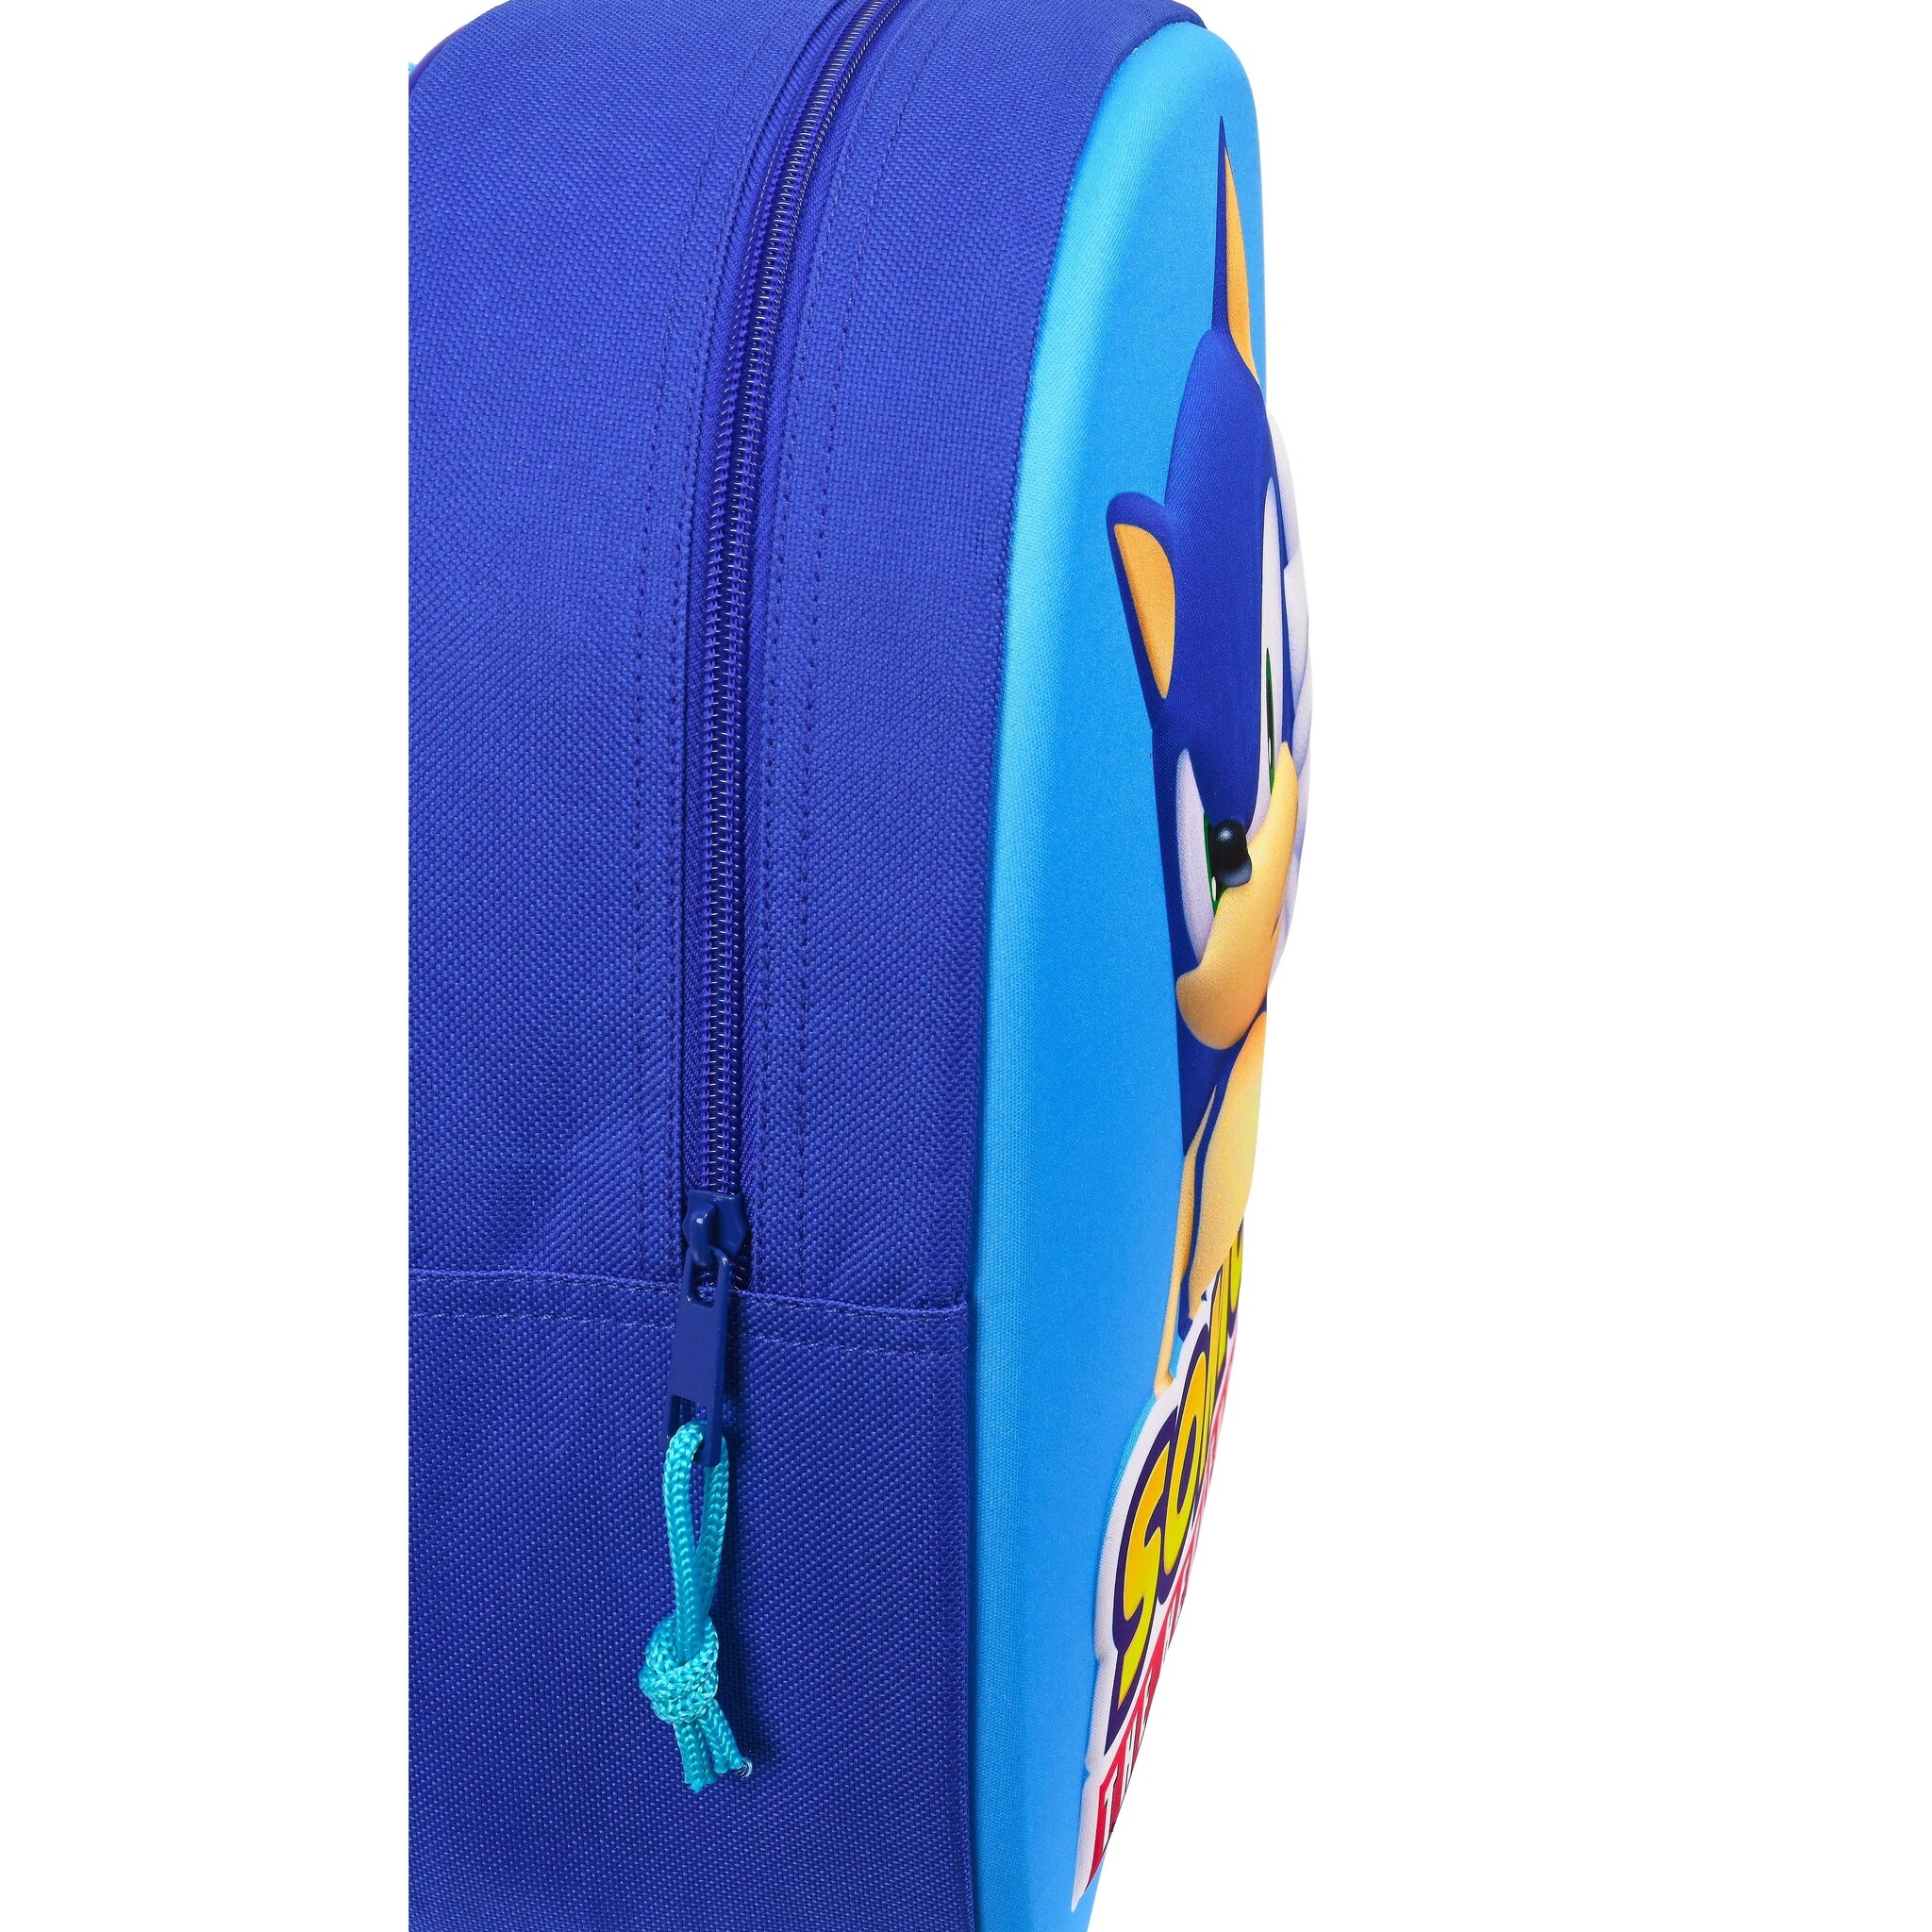 Sonic Backpack, 3D Great - 33 x 27 x 10 cm - Polyester